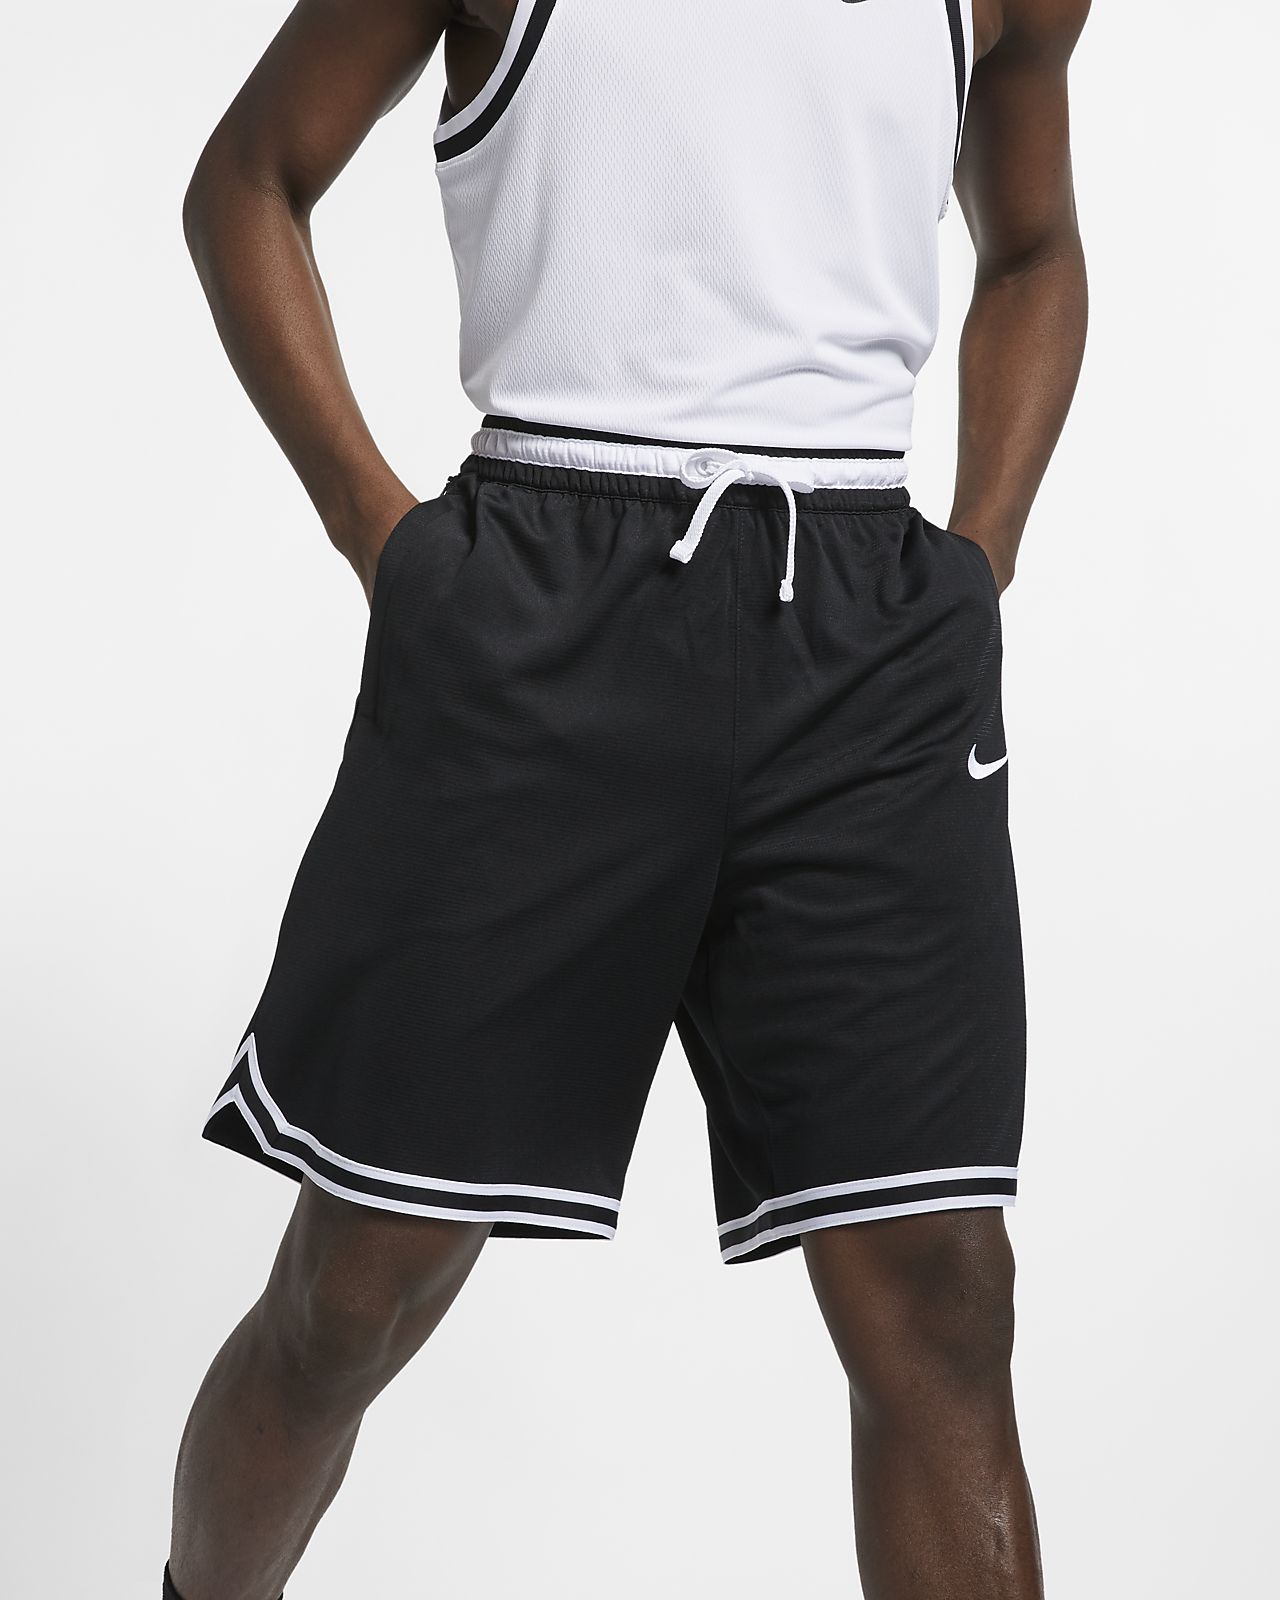 43 best ideas for coloring | Nike Basketball Shorts